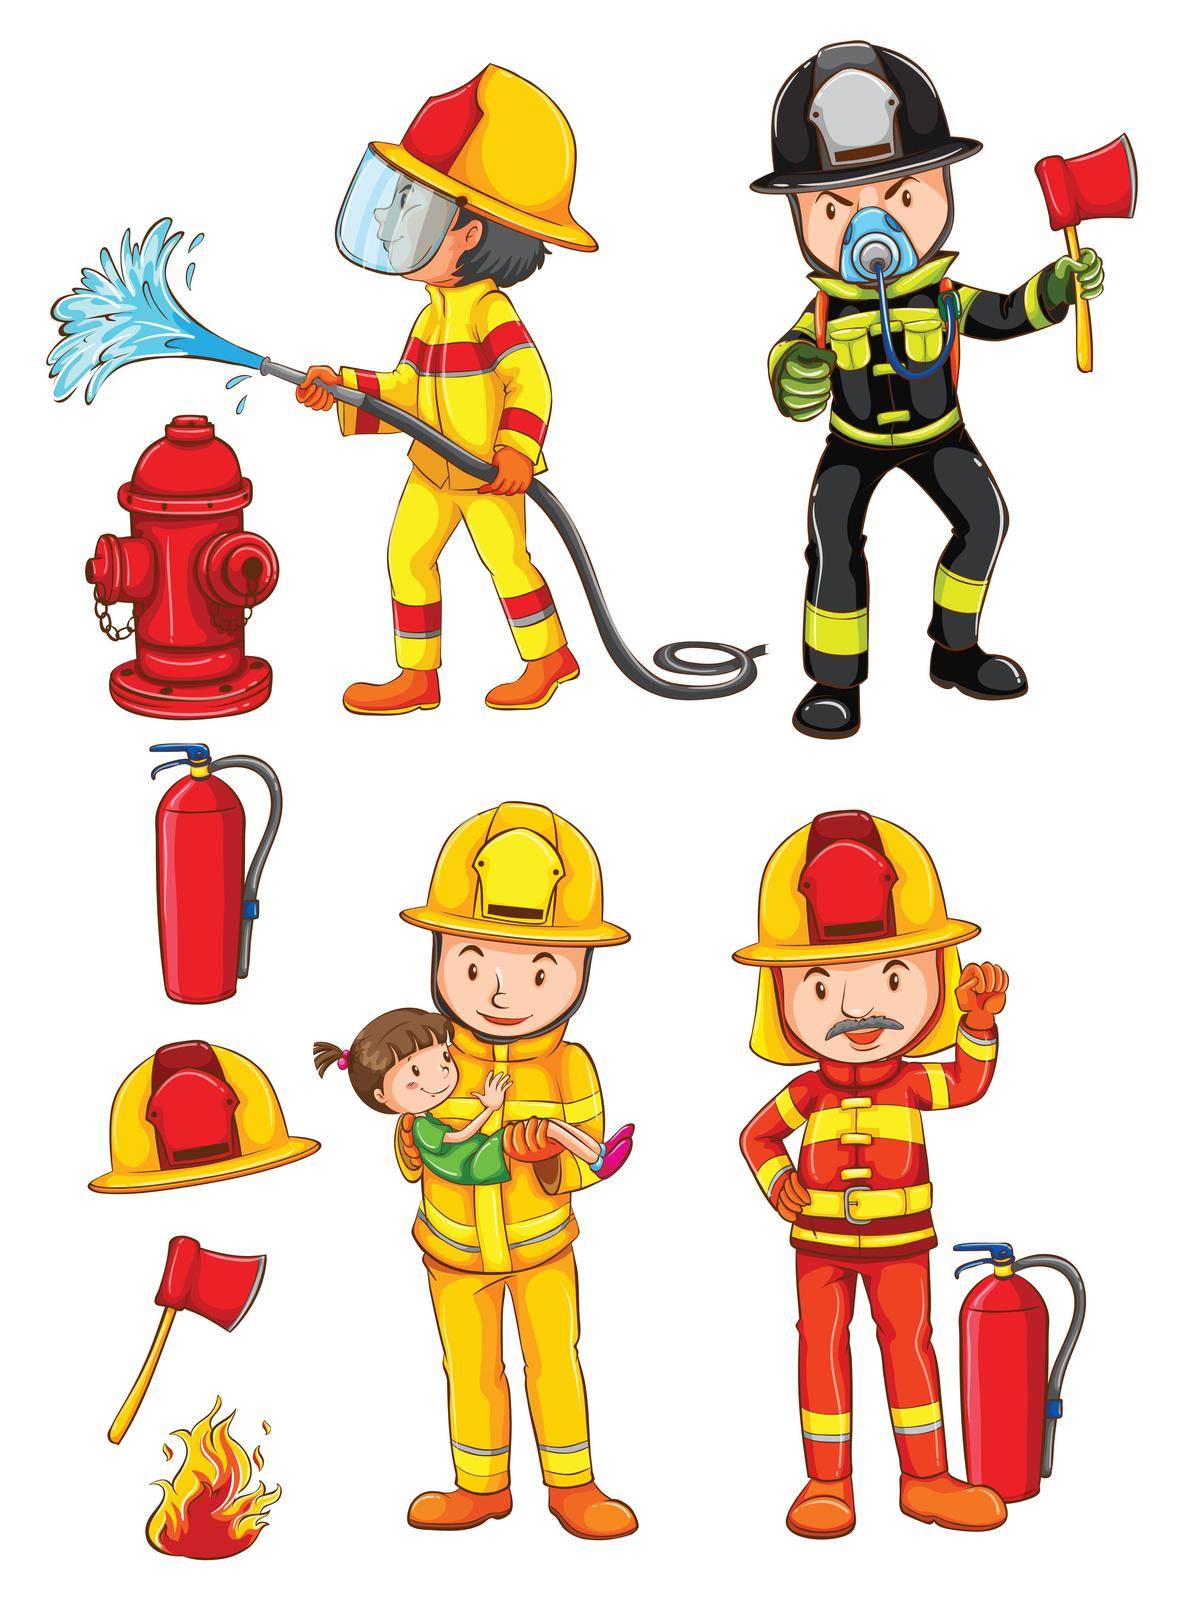 Simple sketches of the firemen by iimages